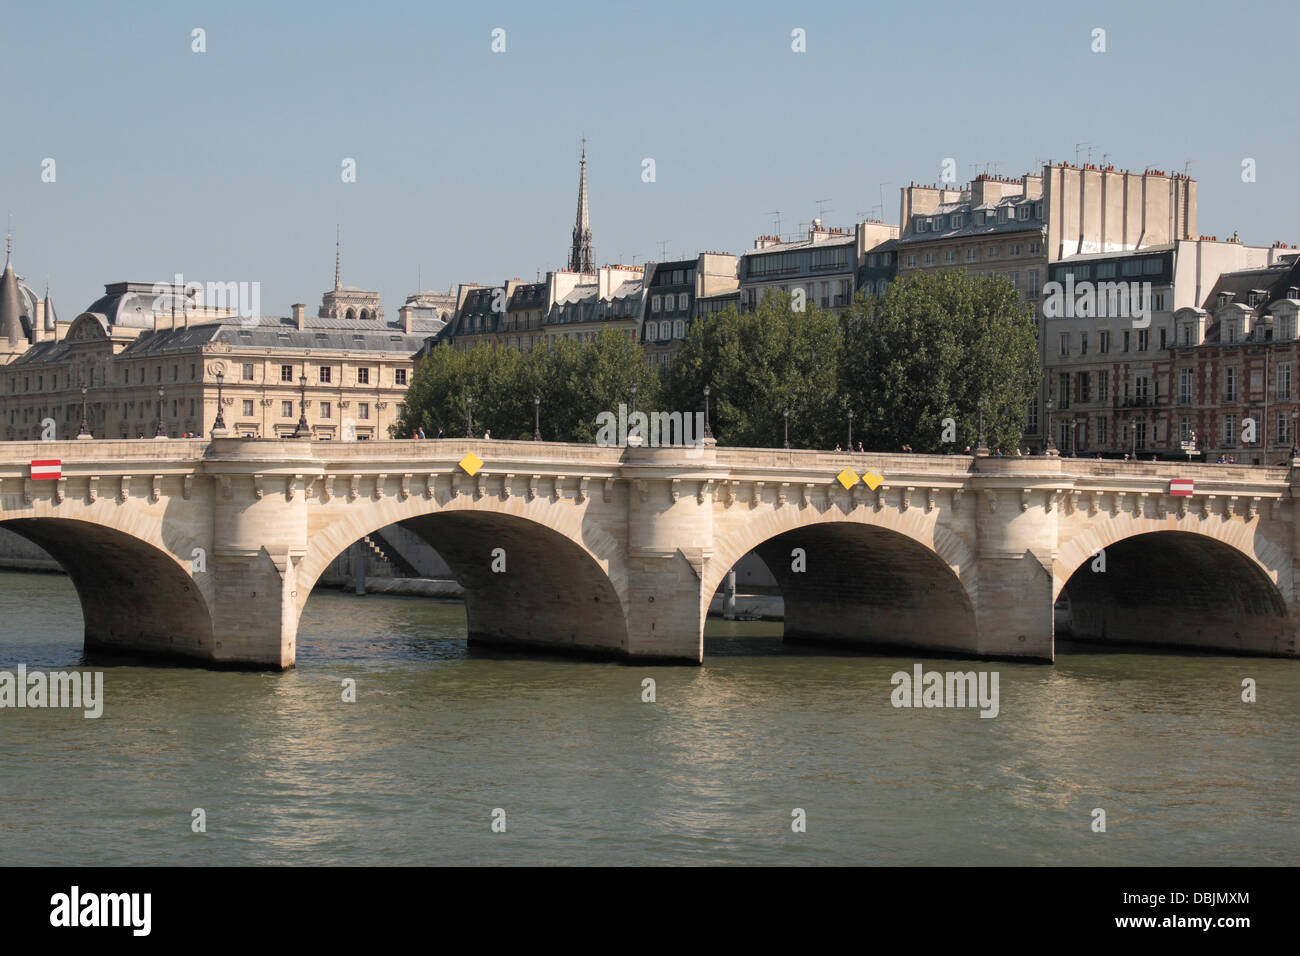 The Pont Nerf stone (northern section) arched bridge showing CEVNI signs on its arches, River Seine, Paris, France. Stock Photo